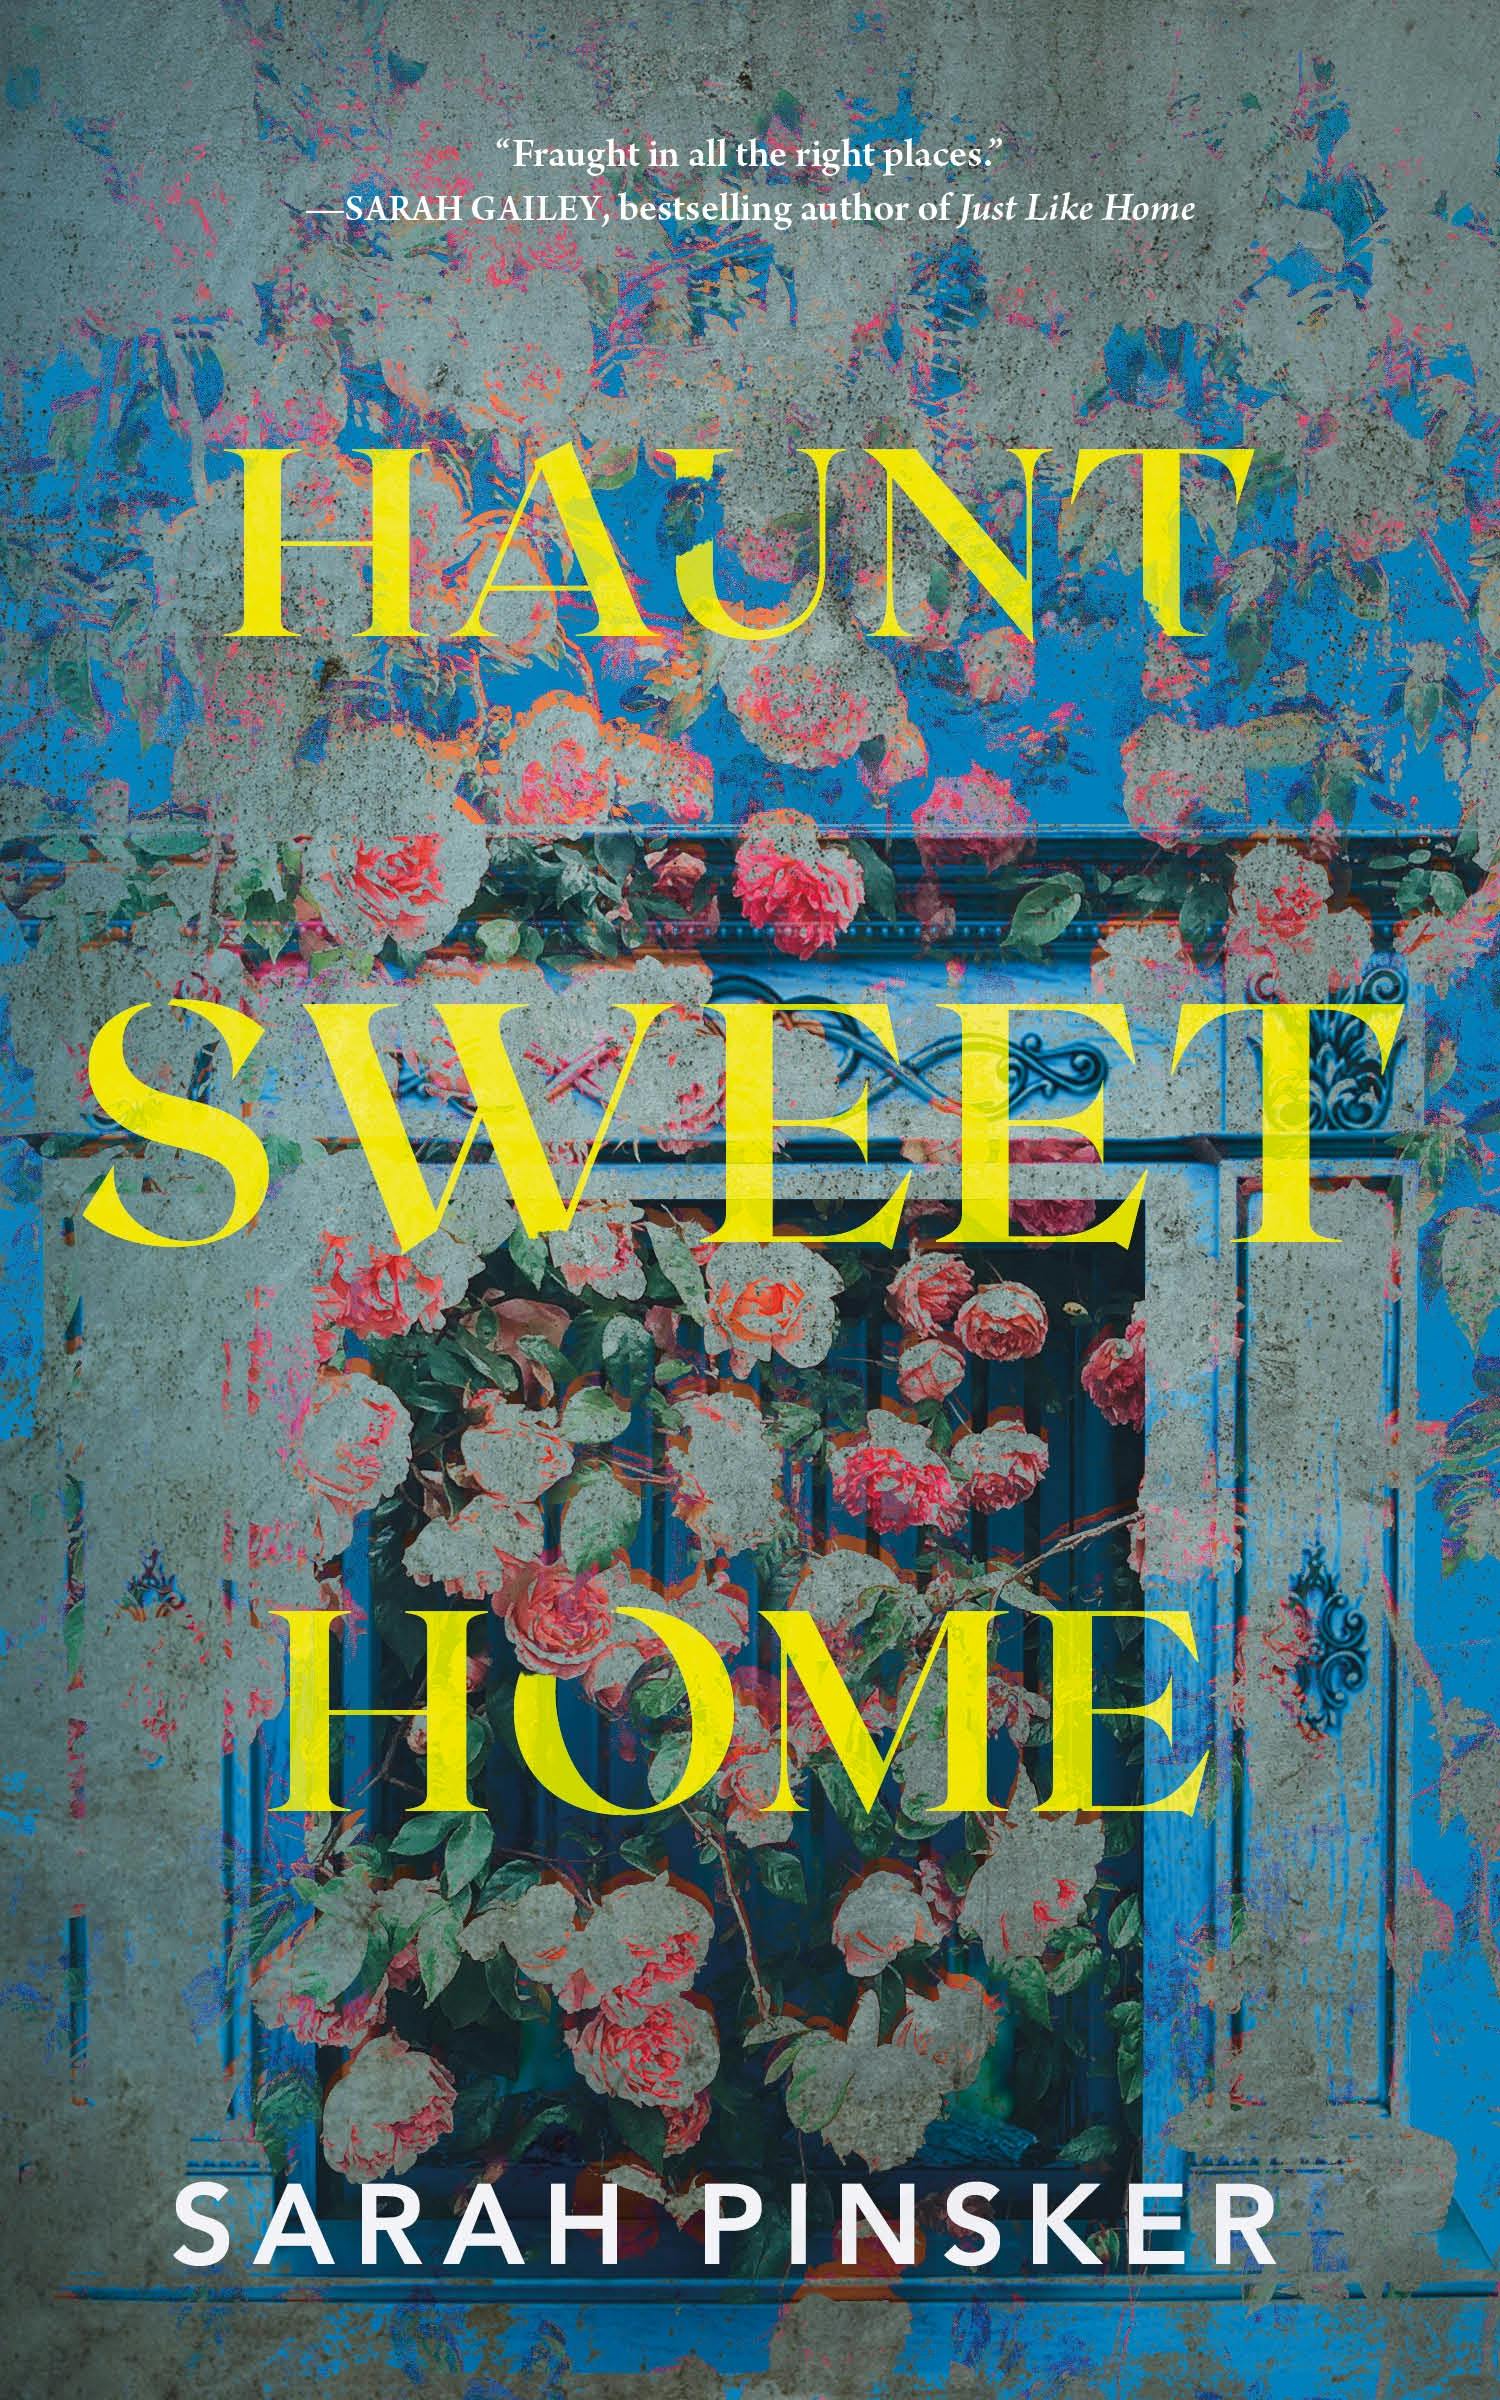 Cover for the book titled as: Haunt Sweet Home